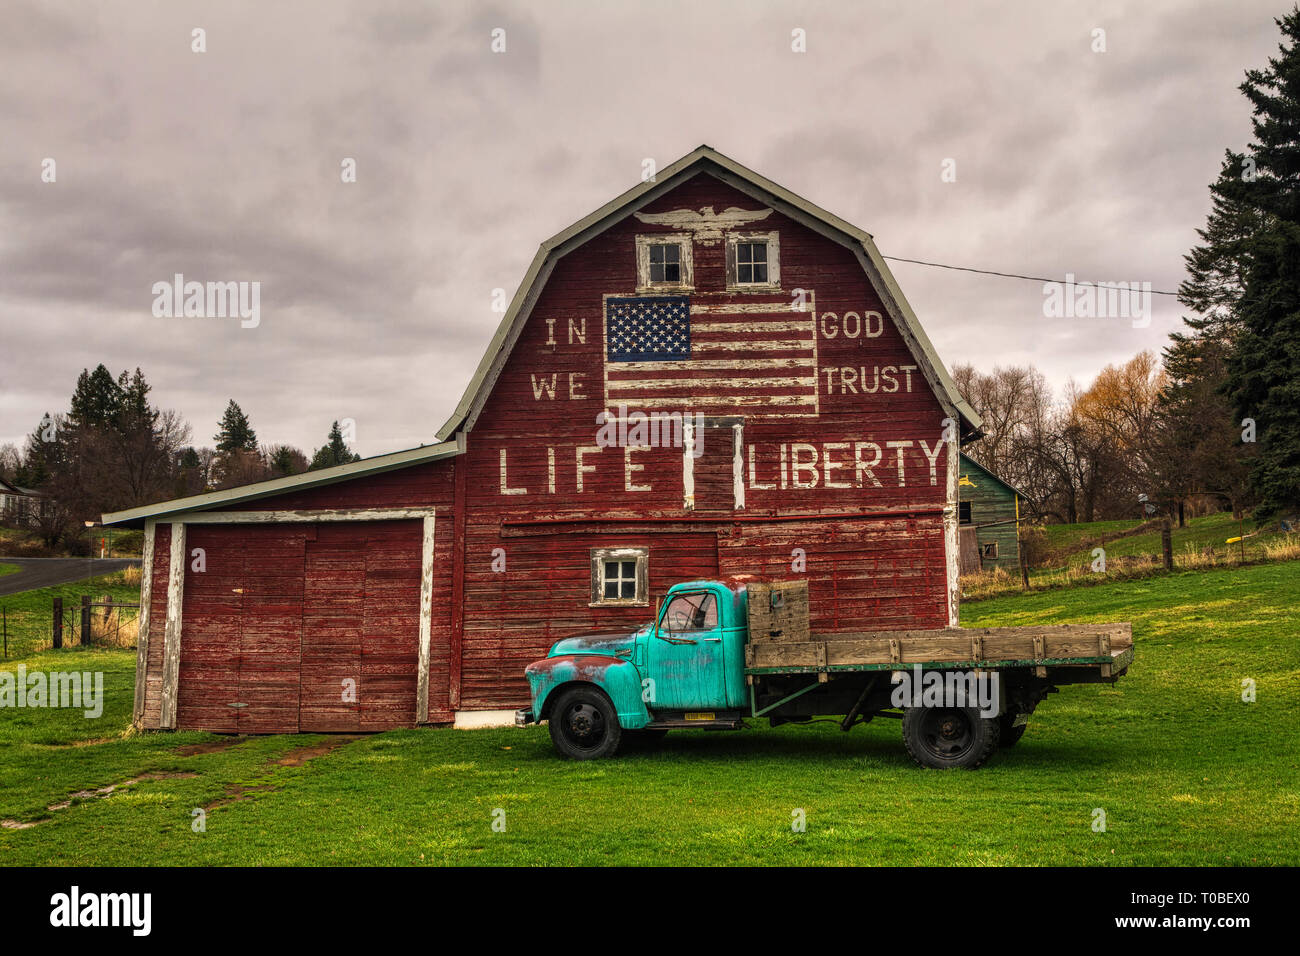 A barn located in a small town of the Palouse Region of Eastern Washington with a USA Flag and patriotic words painted on it. Stock Photo